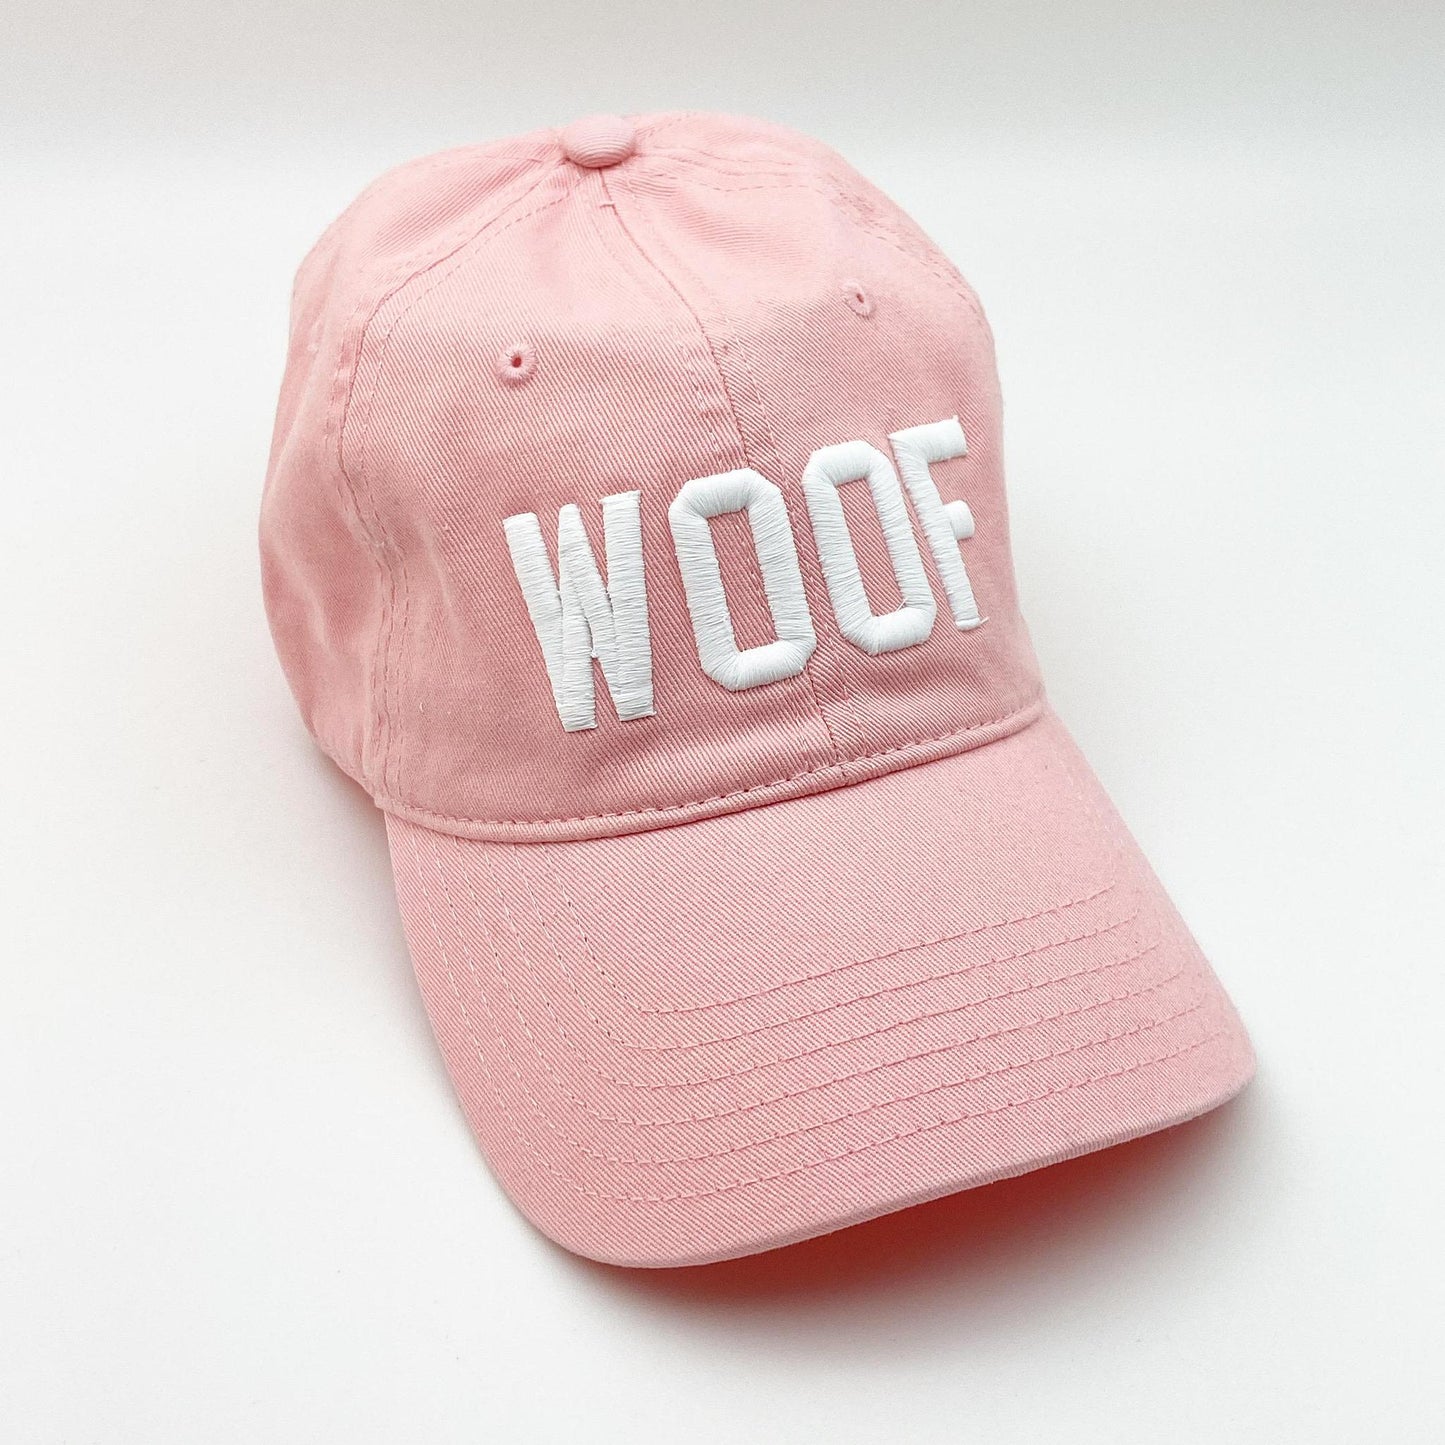 Ballcap - WOOF in White on Pink